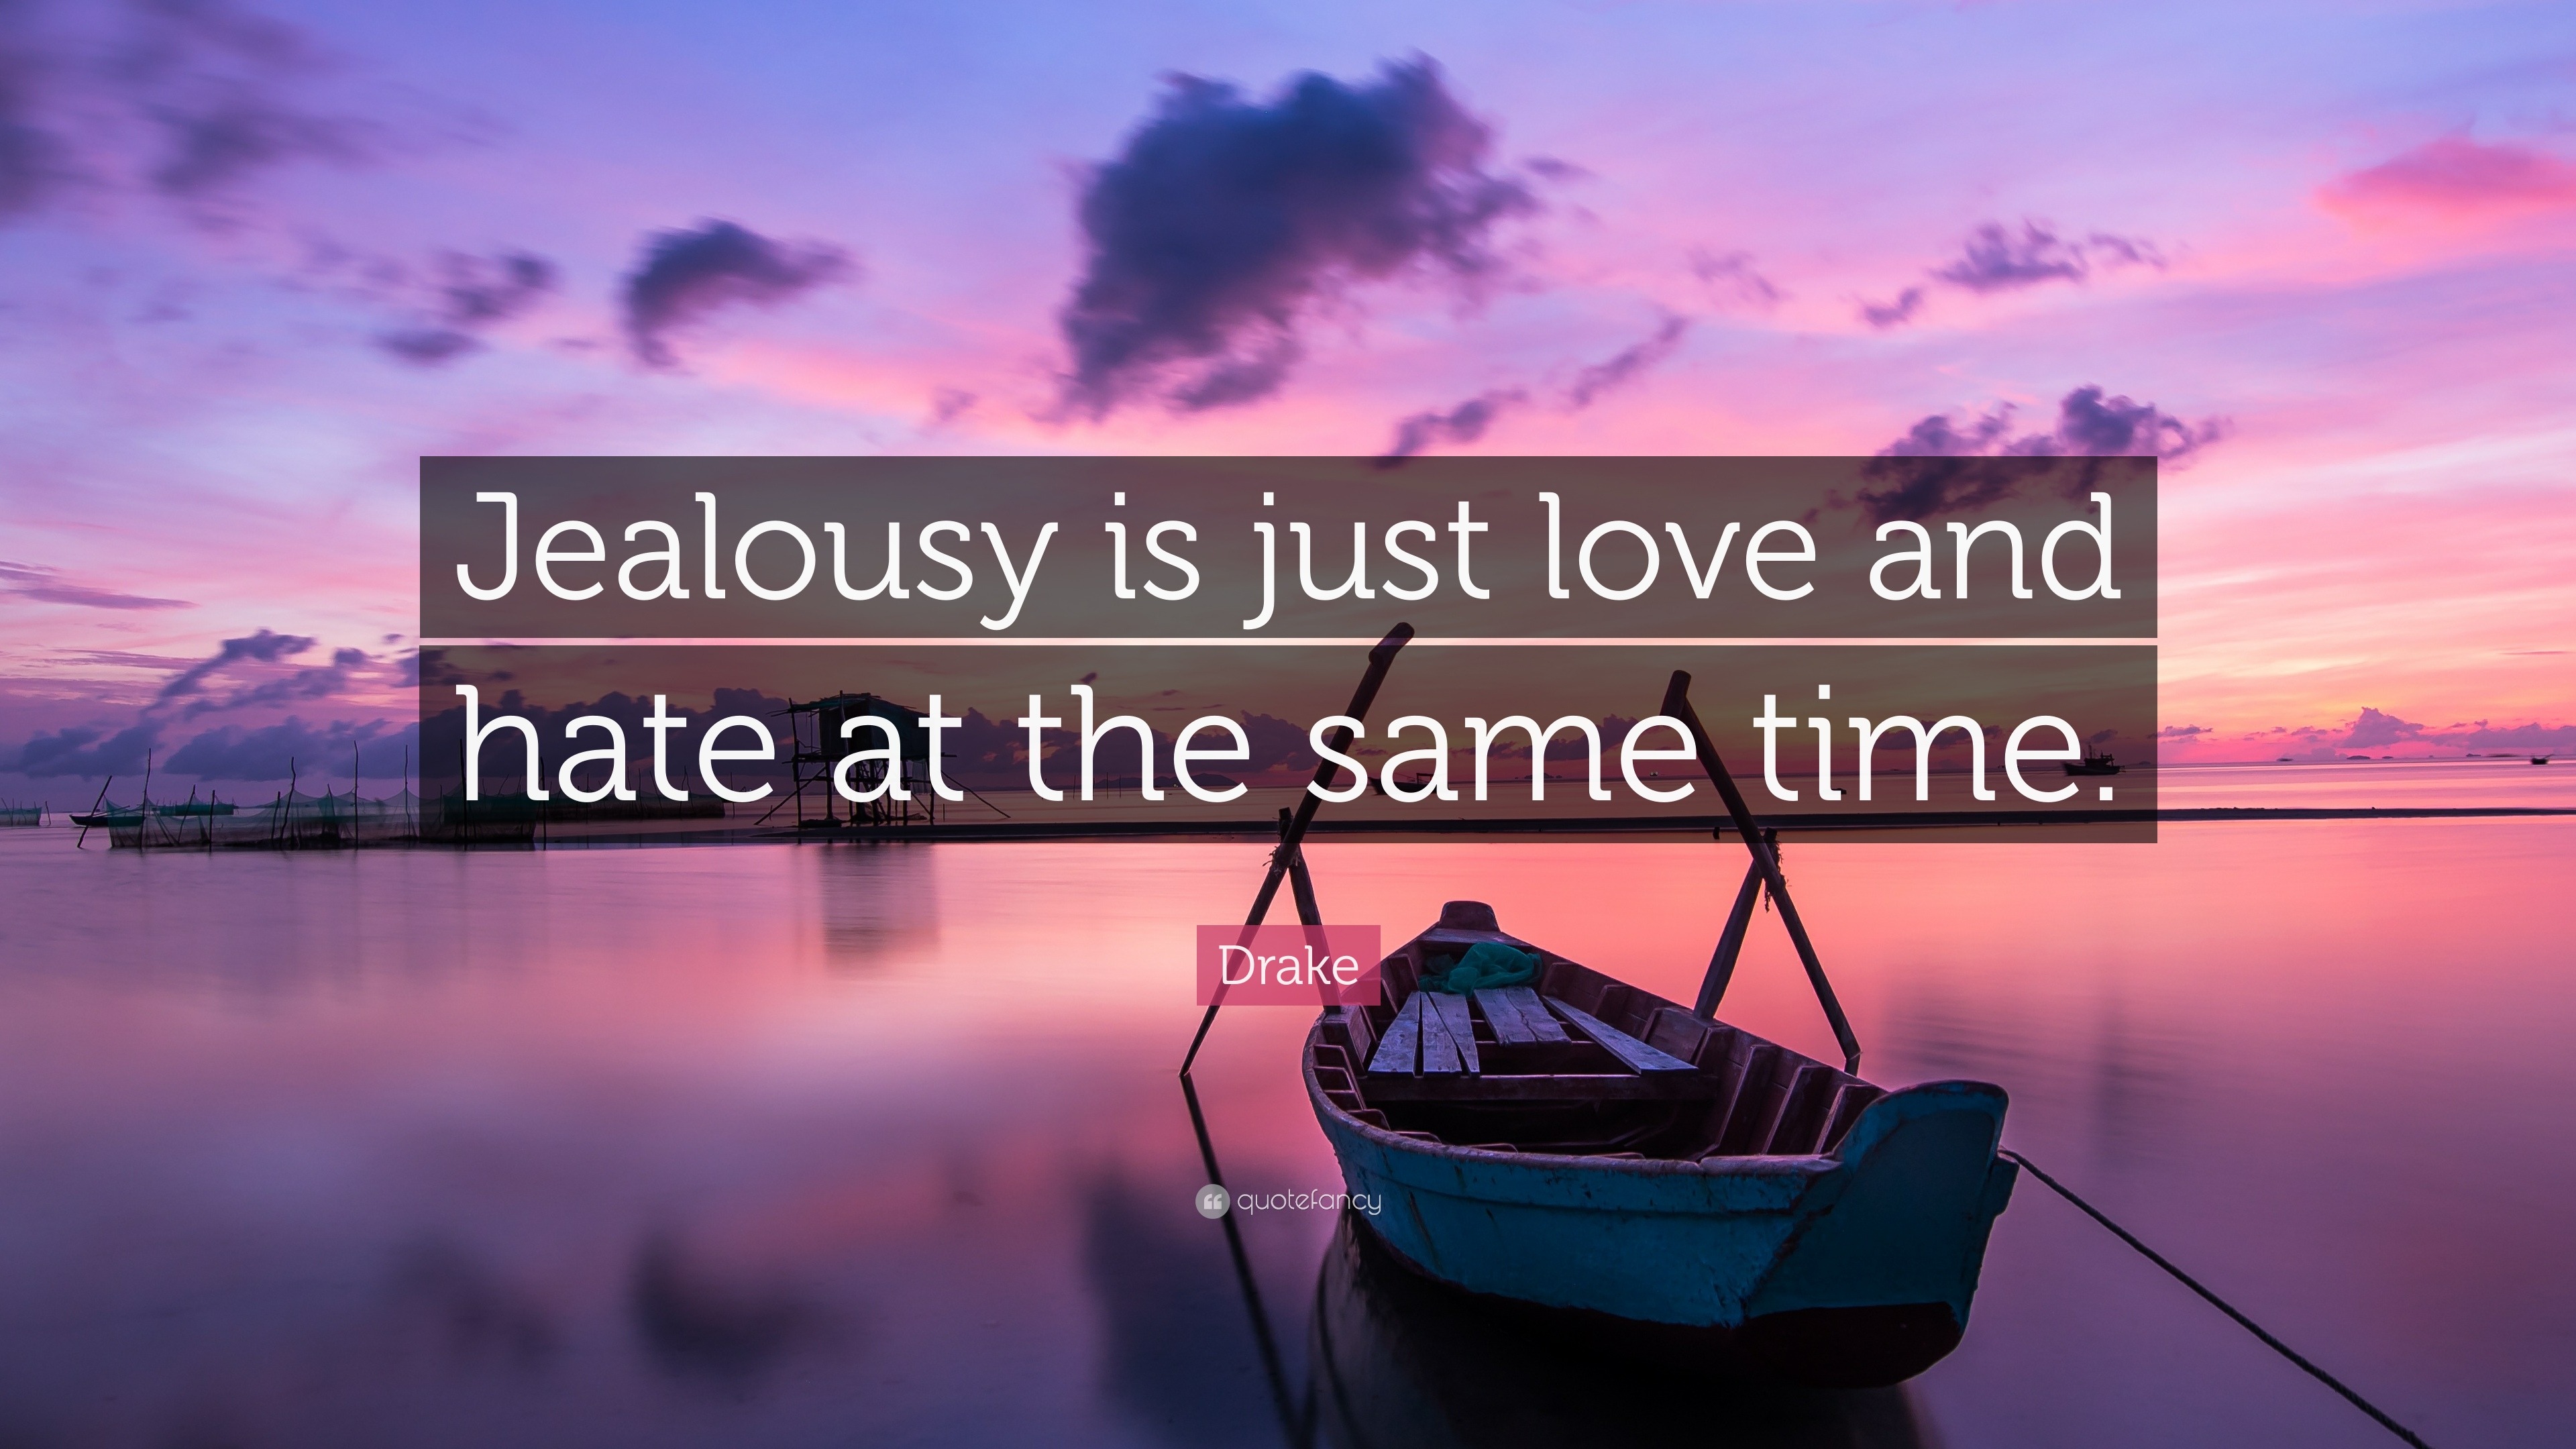 Drake Quote: “Jealousy Is Just Love And Hate At The Same Time.”